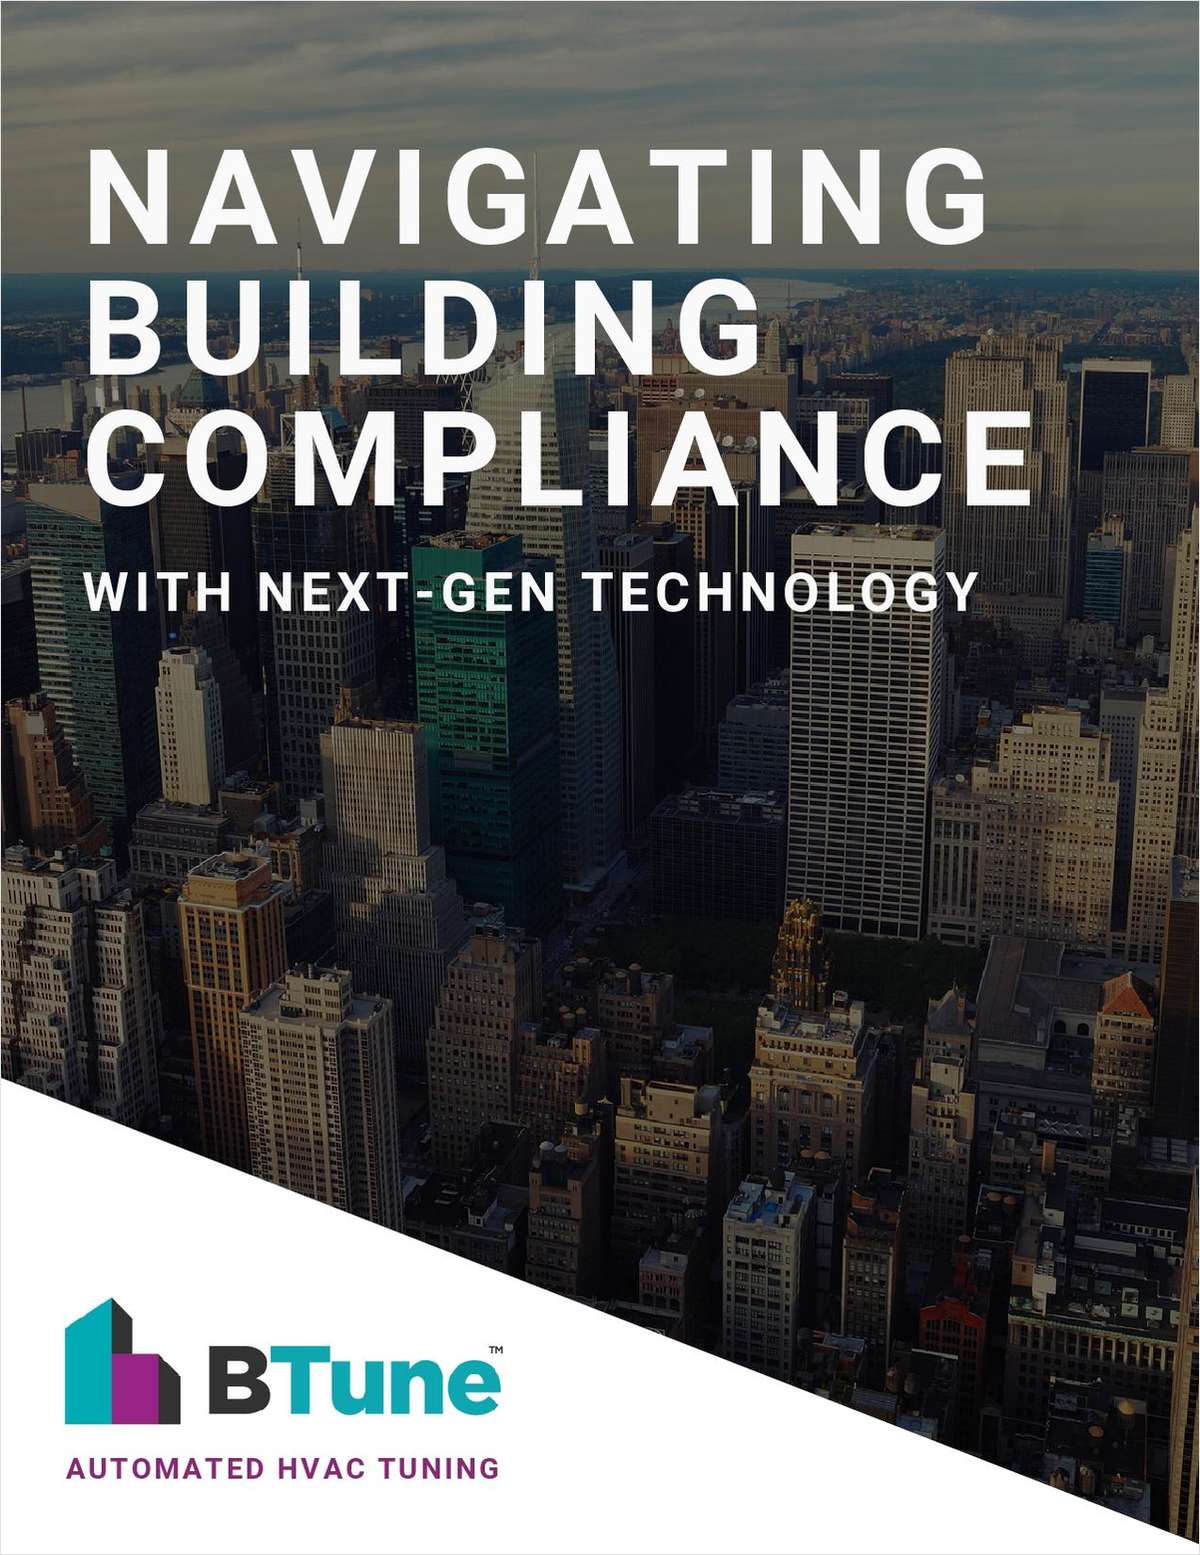 Navigating Building Compliance with Next-Gen Technology